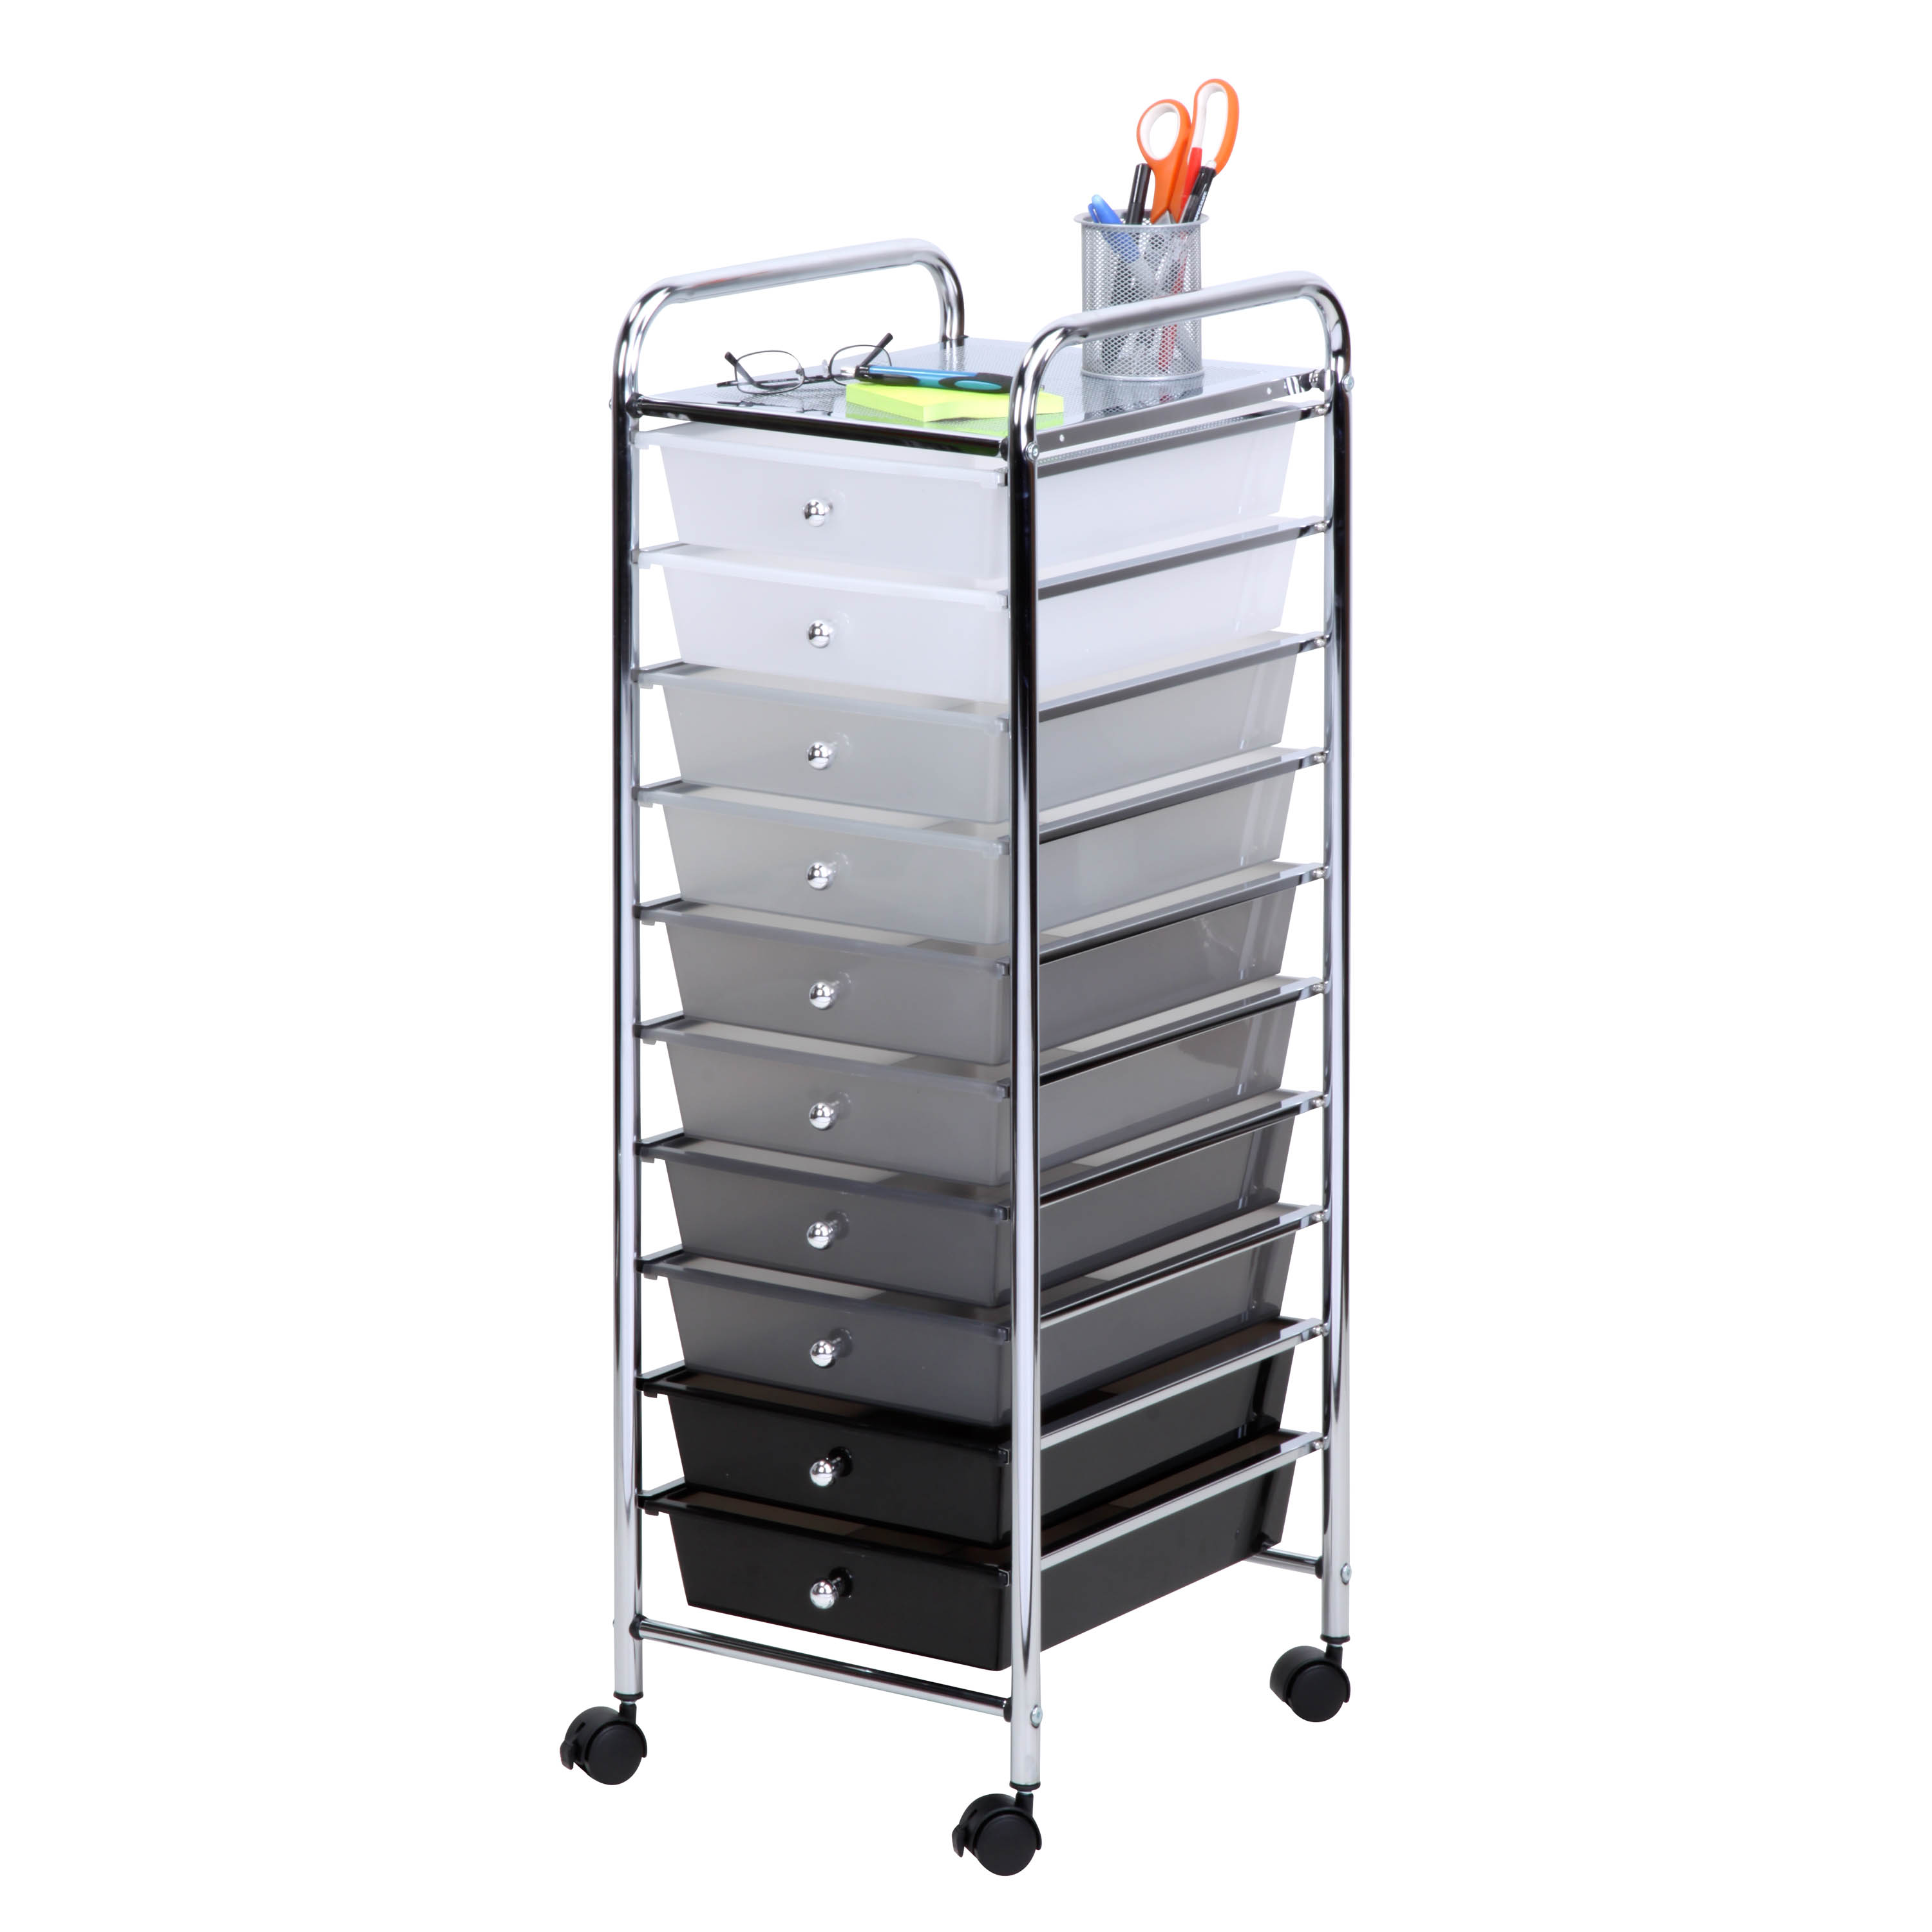 Honey-Can-Do Plastic and Steel 10-Drawer Rolling Storage Cart with 1 Shelf, Gray Ombré - image 3 of 4